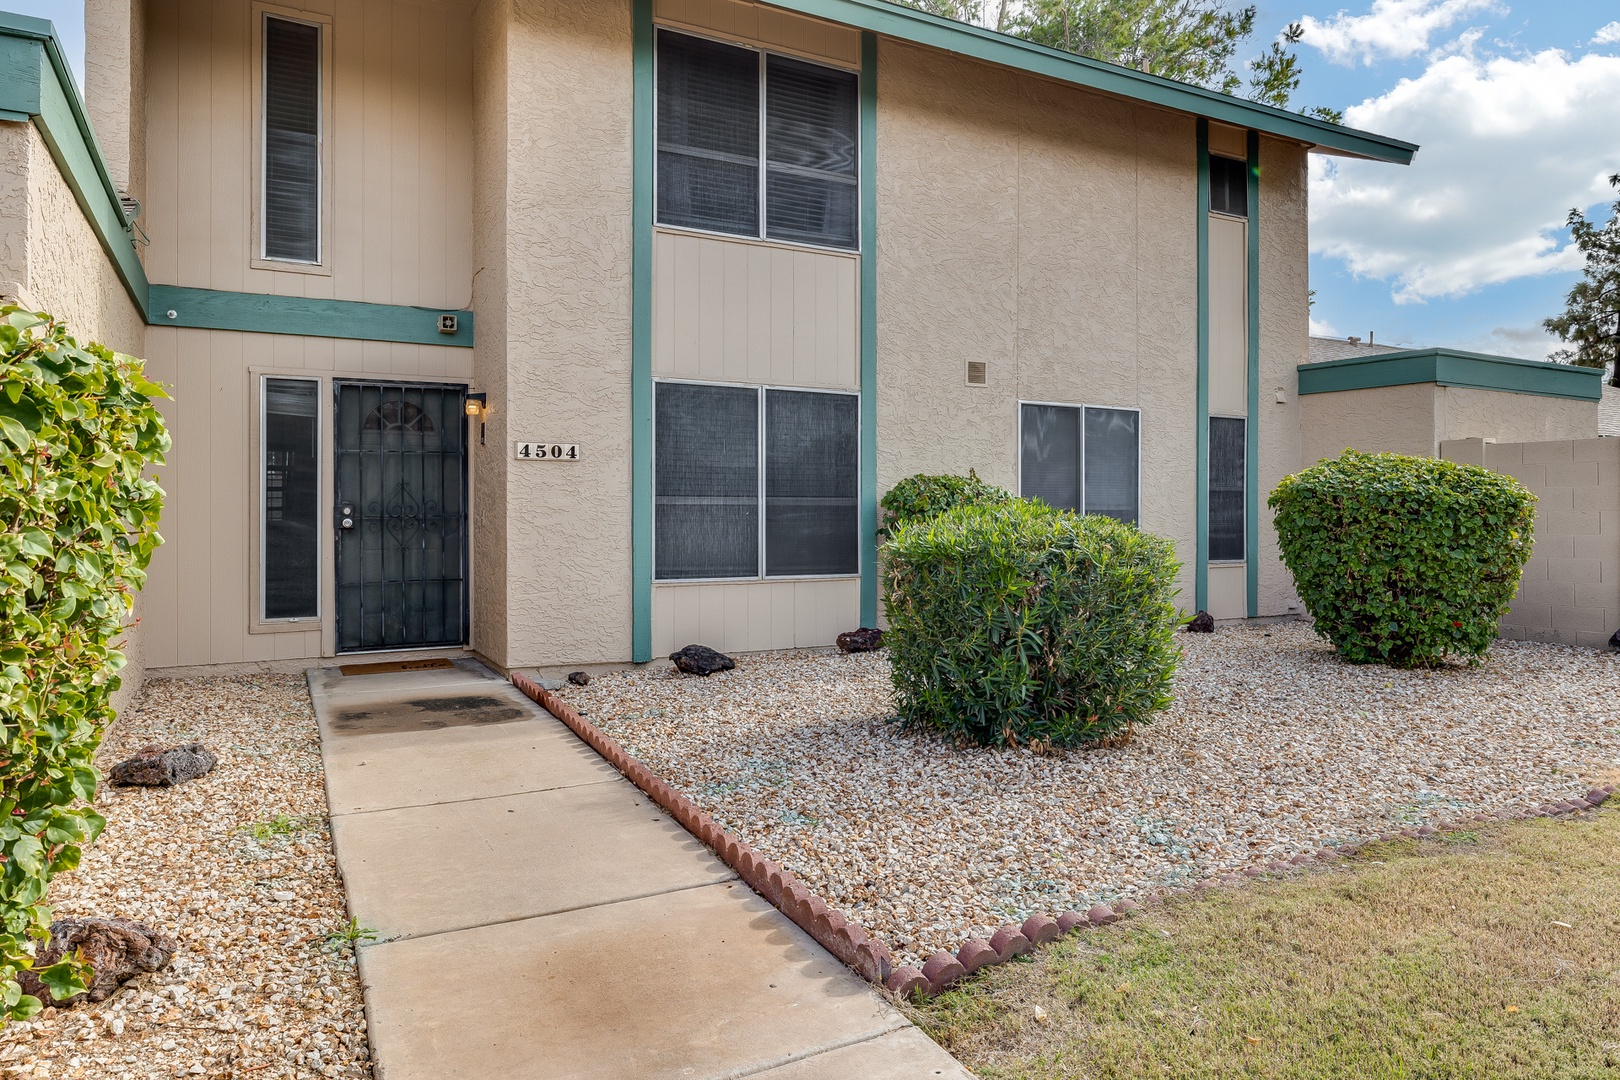 Glendale Vacation Rentals, Condo at the Bell Air - Private, ground level entrance